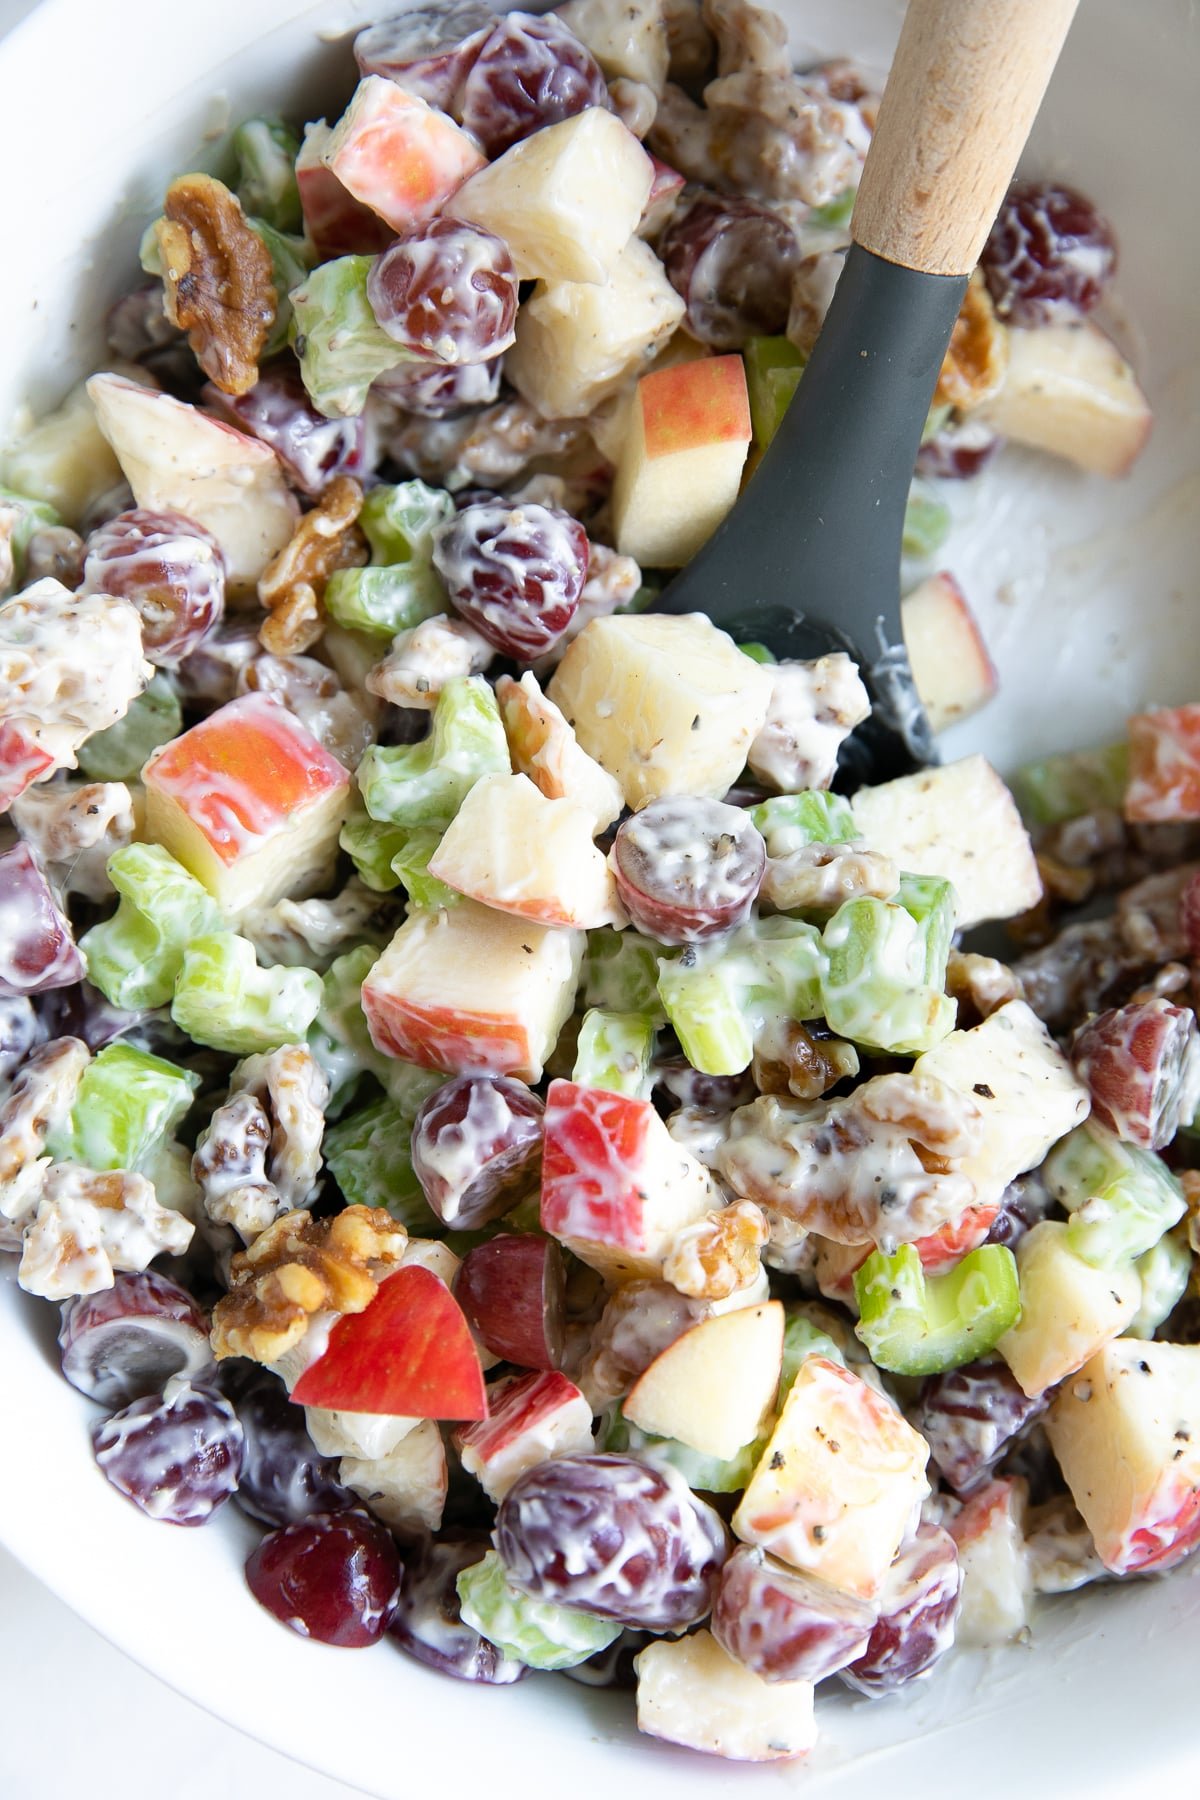 Salad made with diced apples, grapes, walnuts, and chopped celery, tossed in mayonnaise